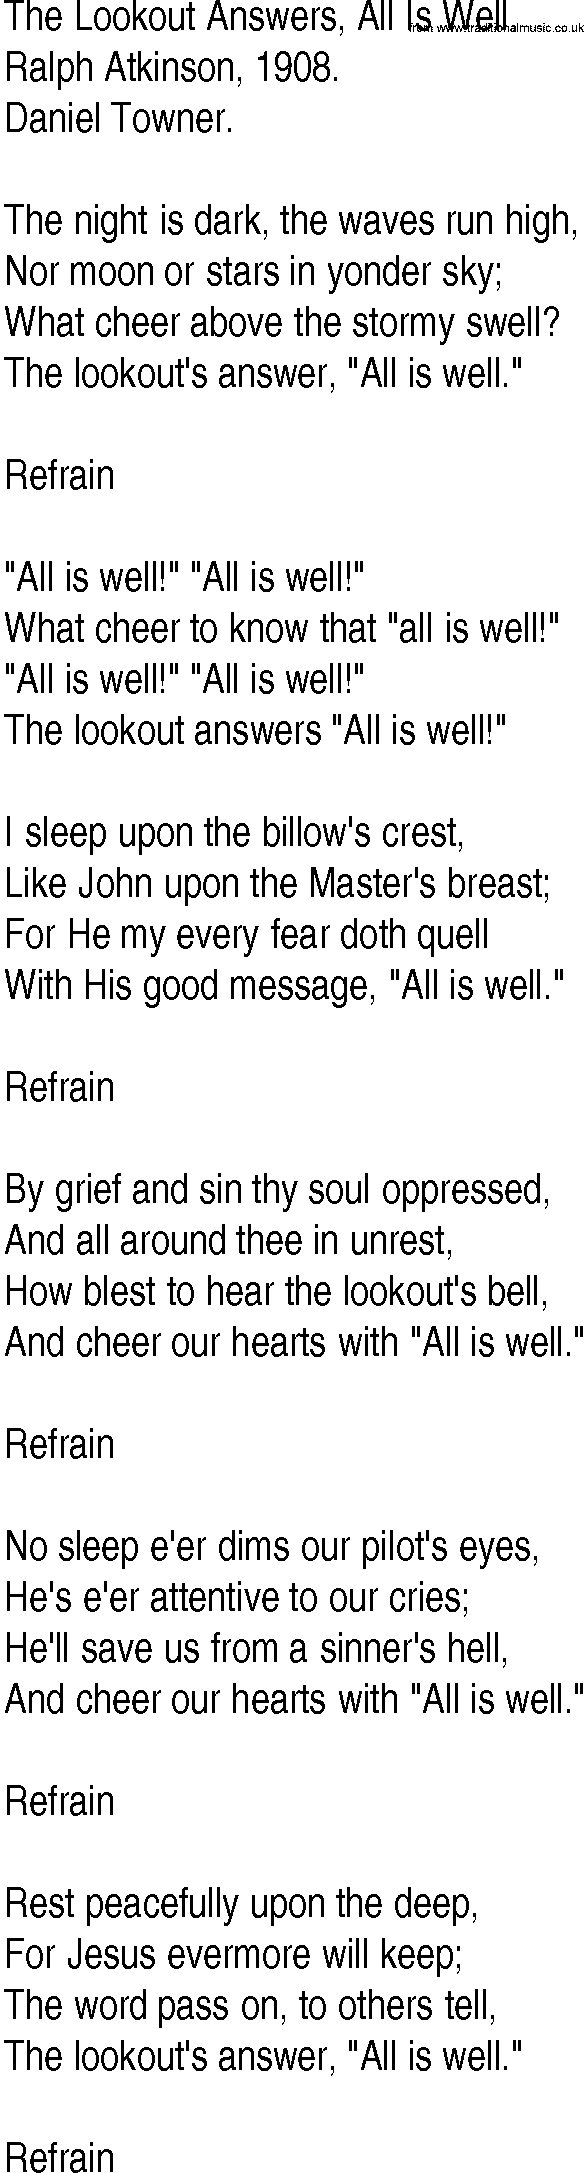 Hymn and Gospel Song: The Lookout Answers, All Is Well by Ralph Atkinson lyrics